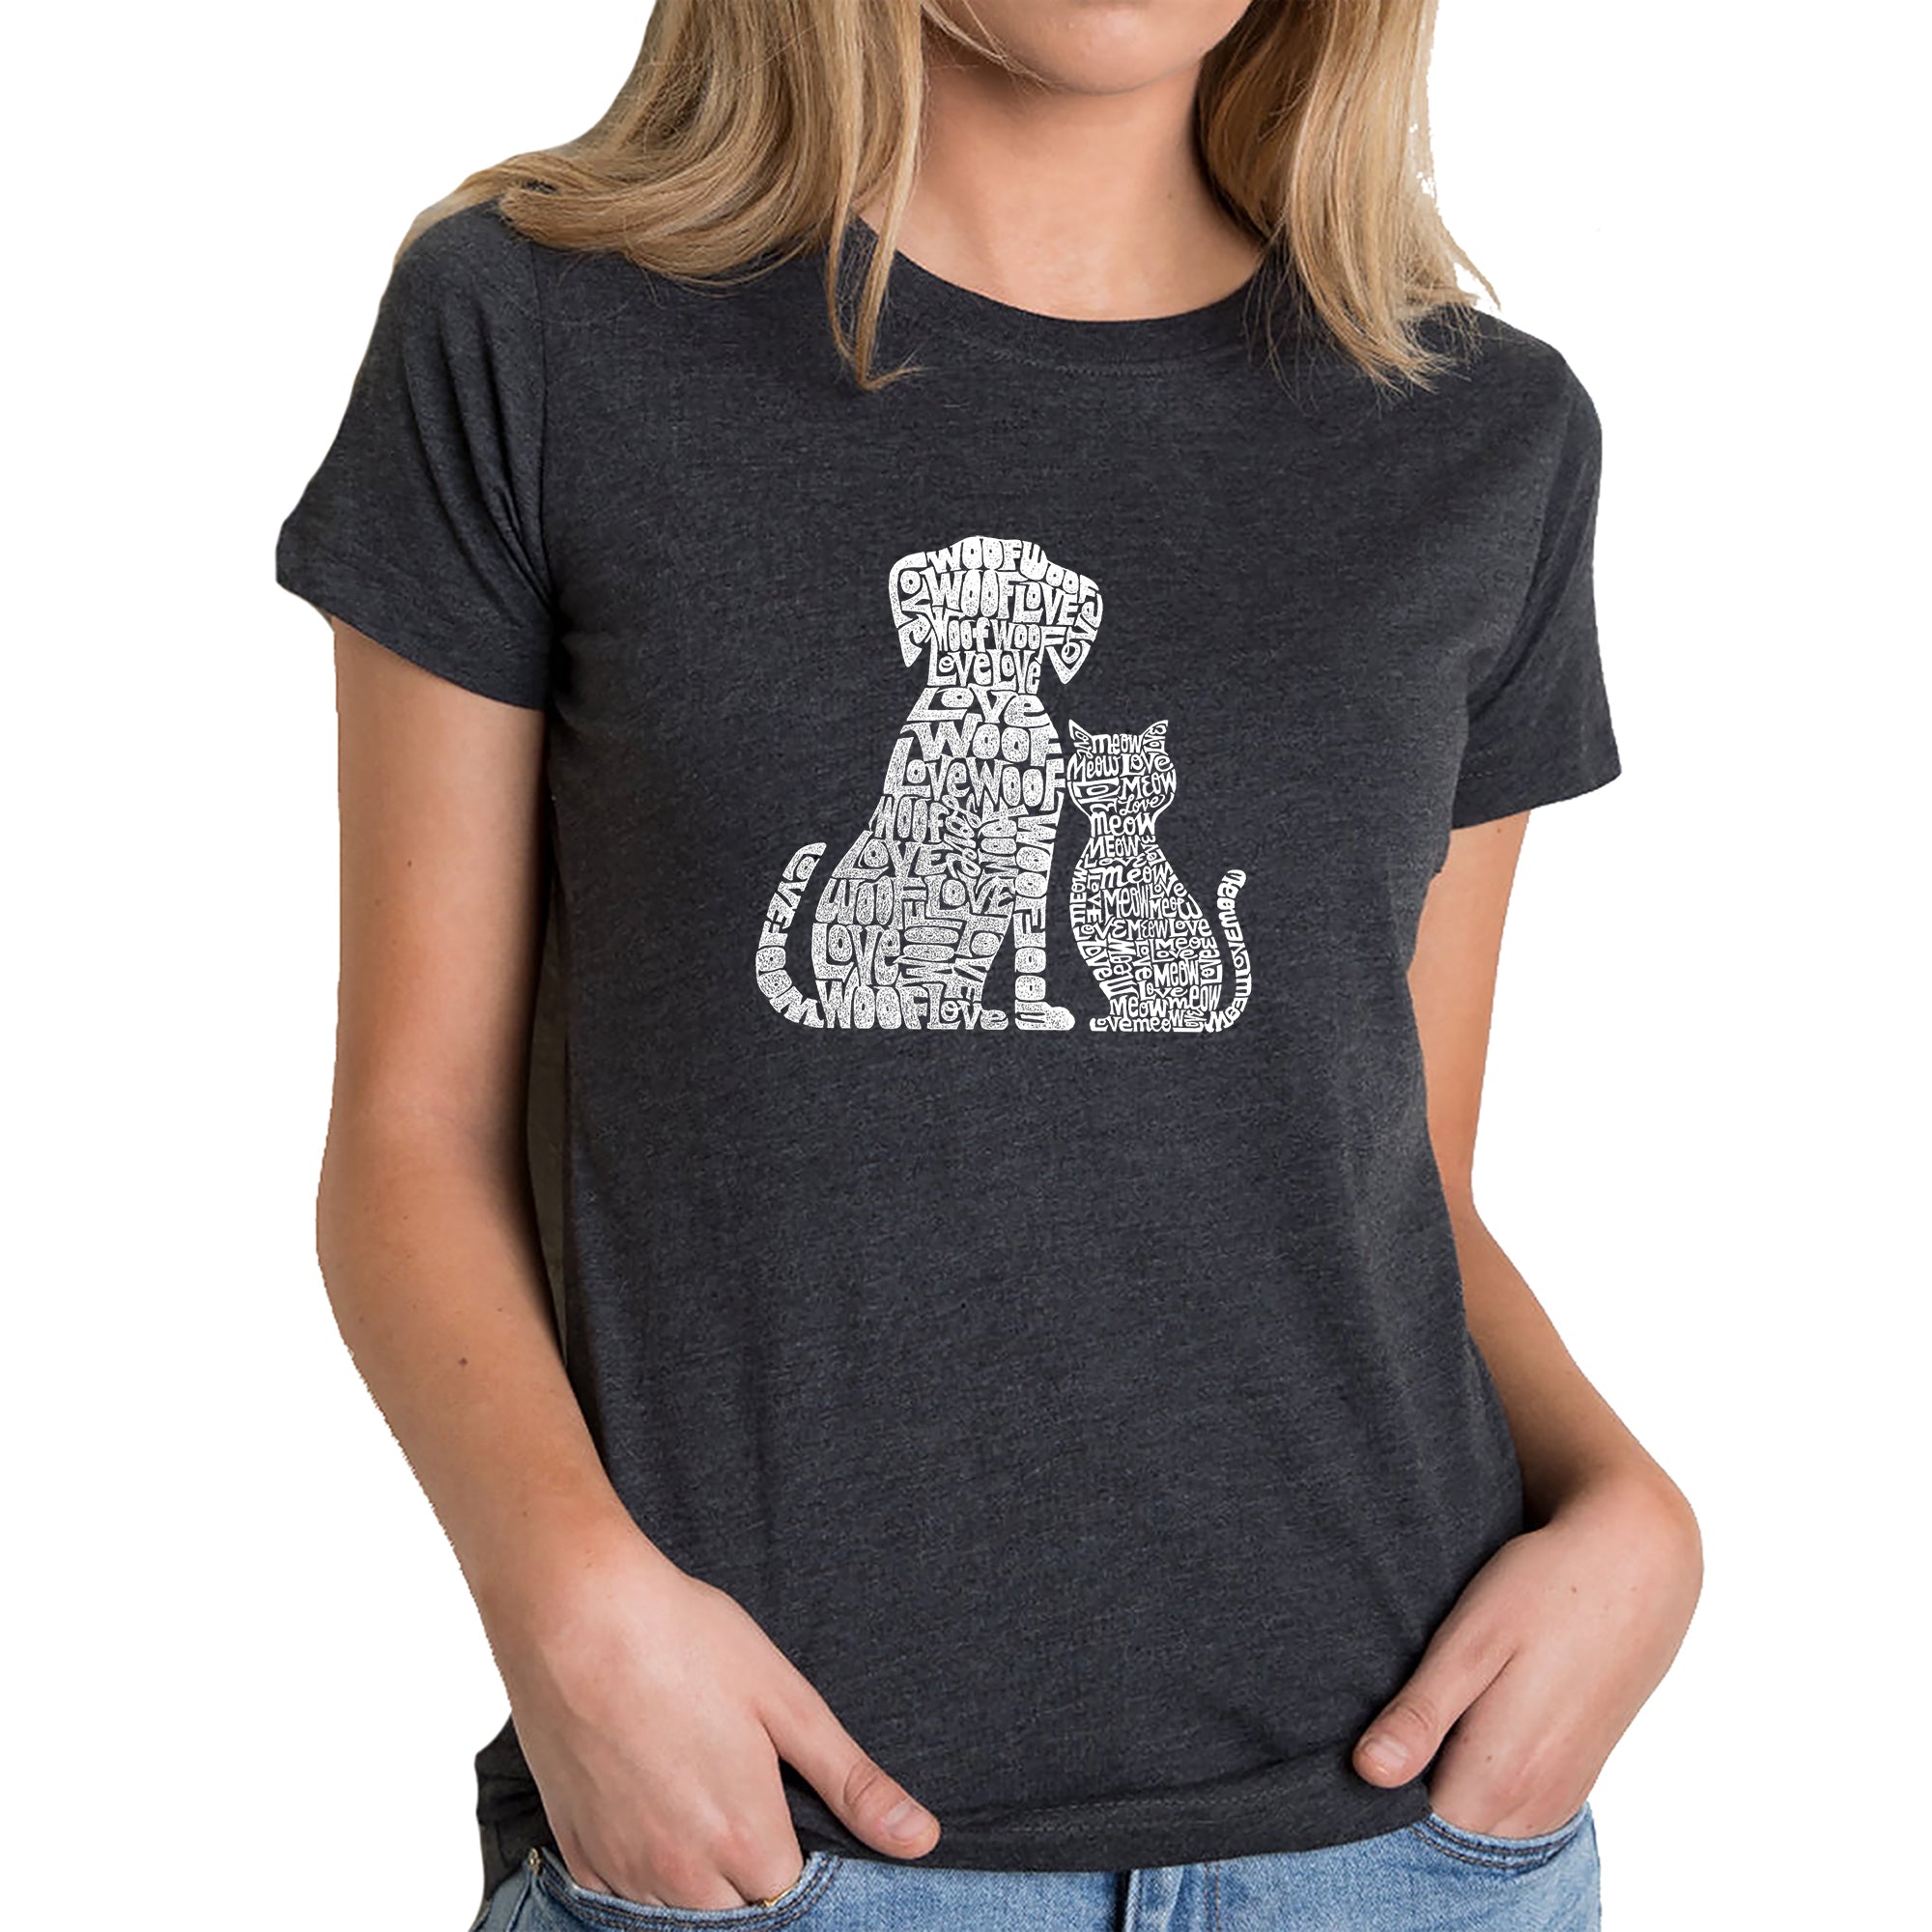 Dogs And Cats - Women's Premium Blend Word Art T-Shirt - Black - Small